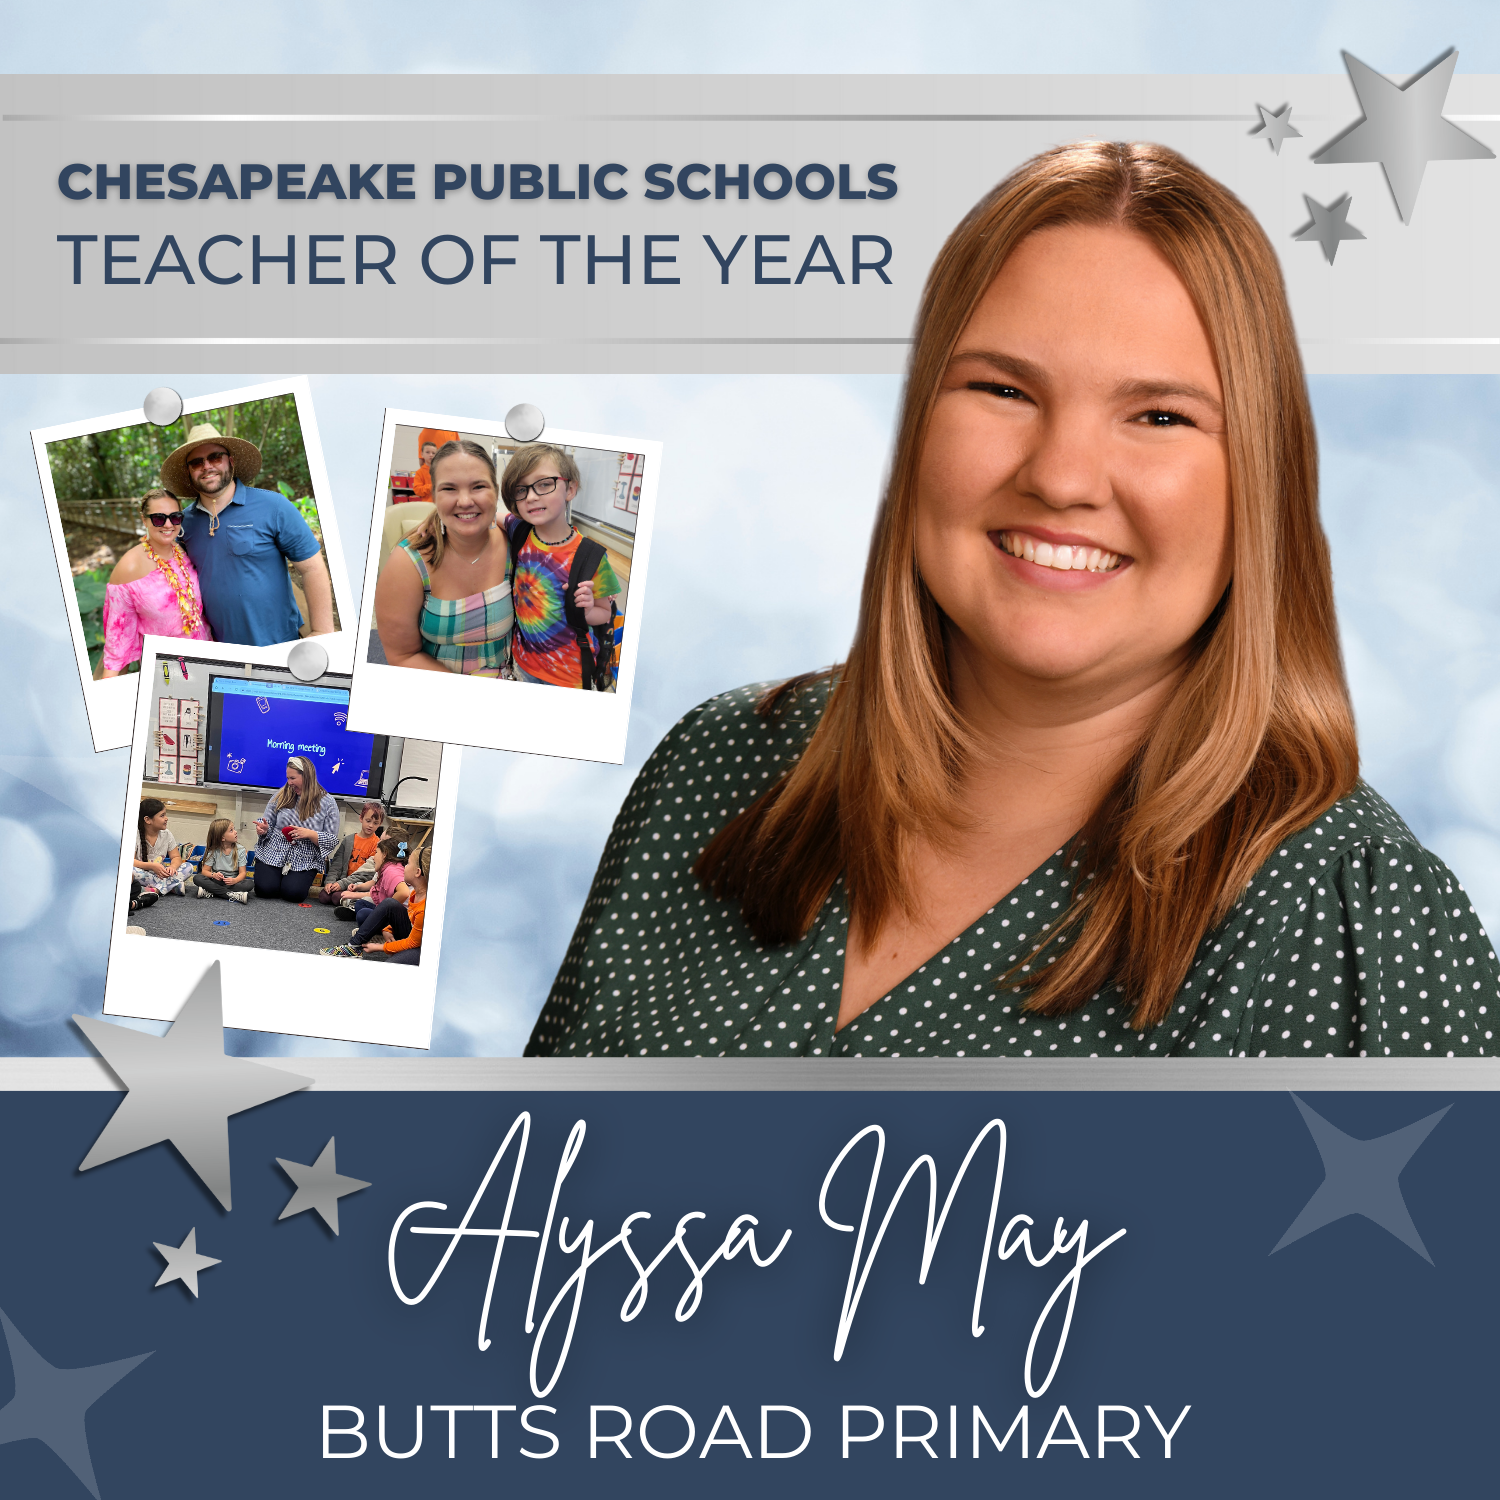 Mrs. Alyssa May has been selected as the Chesapeake Public Schools Teacher of the Year. Mrs. May is an incredible second-grade teacher at Butts Road Primary who brings a wealth of knowledge to her classroom.